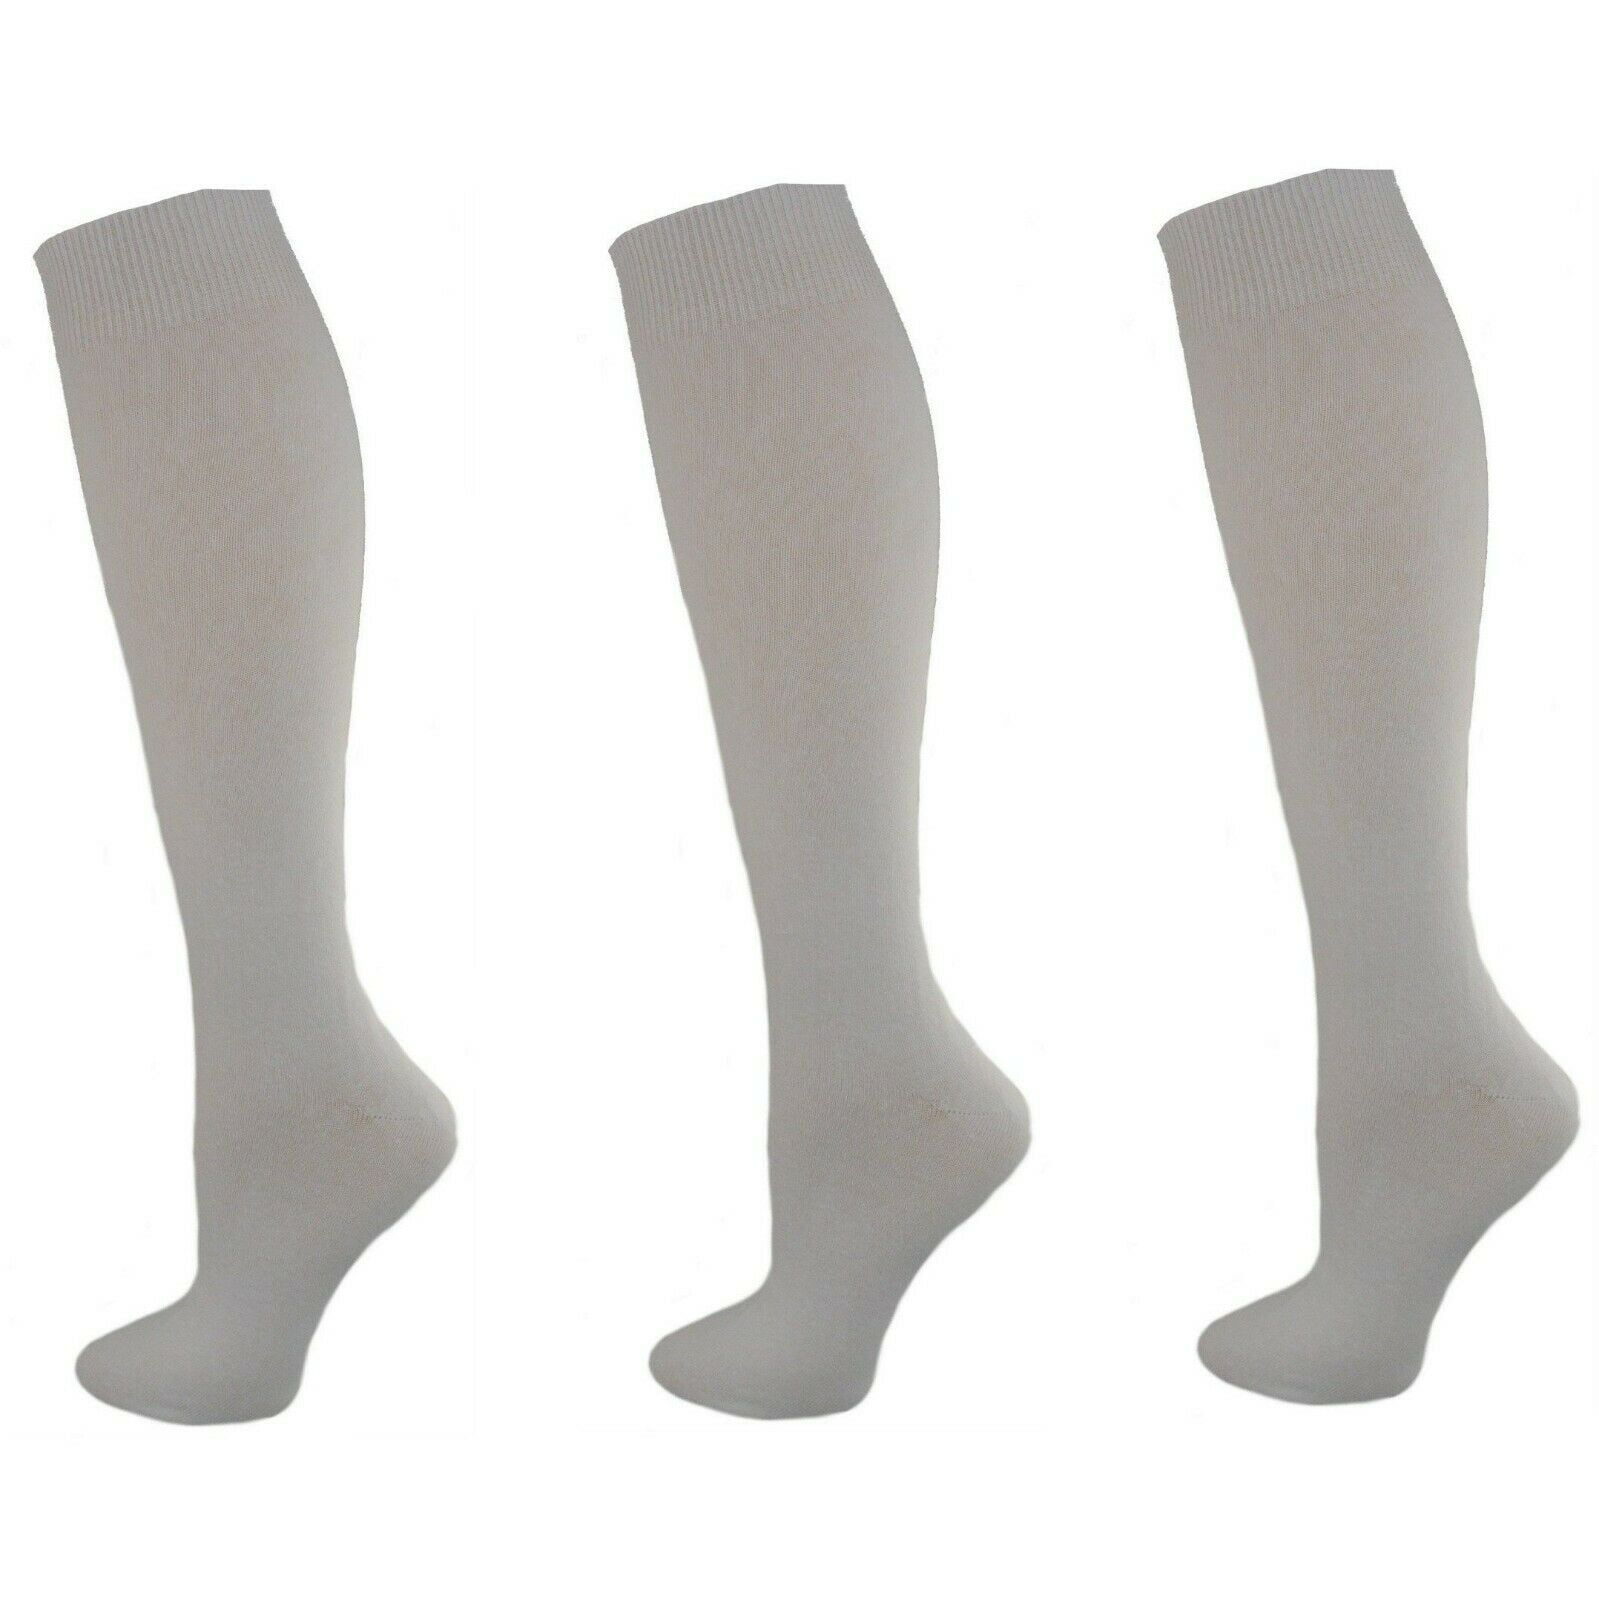 NEW LADIES KNEE HIGH POP COTTON SOCKS ASSORTED COLOURS BACK TO SCHOOL GIRL 4-6.5 